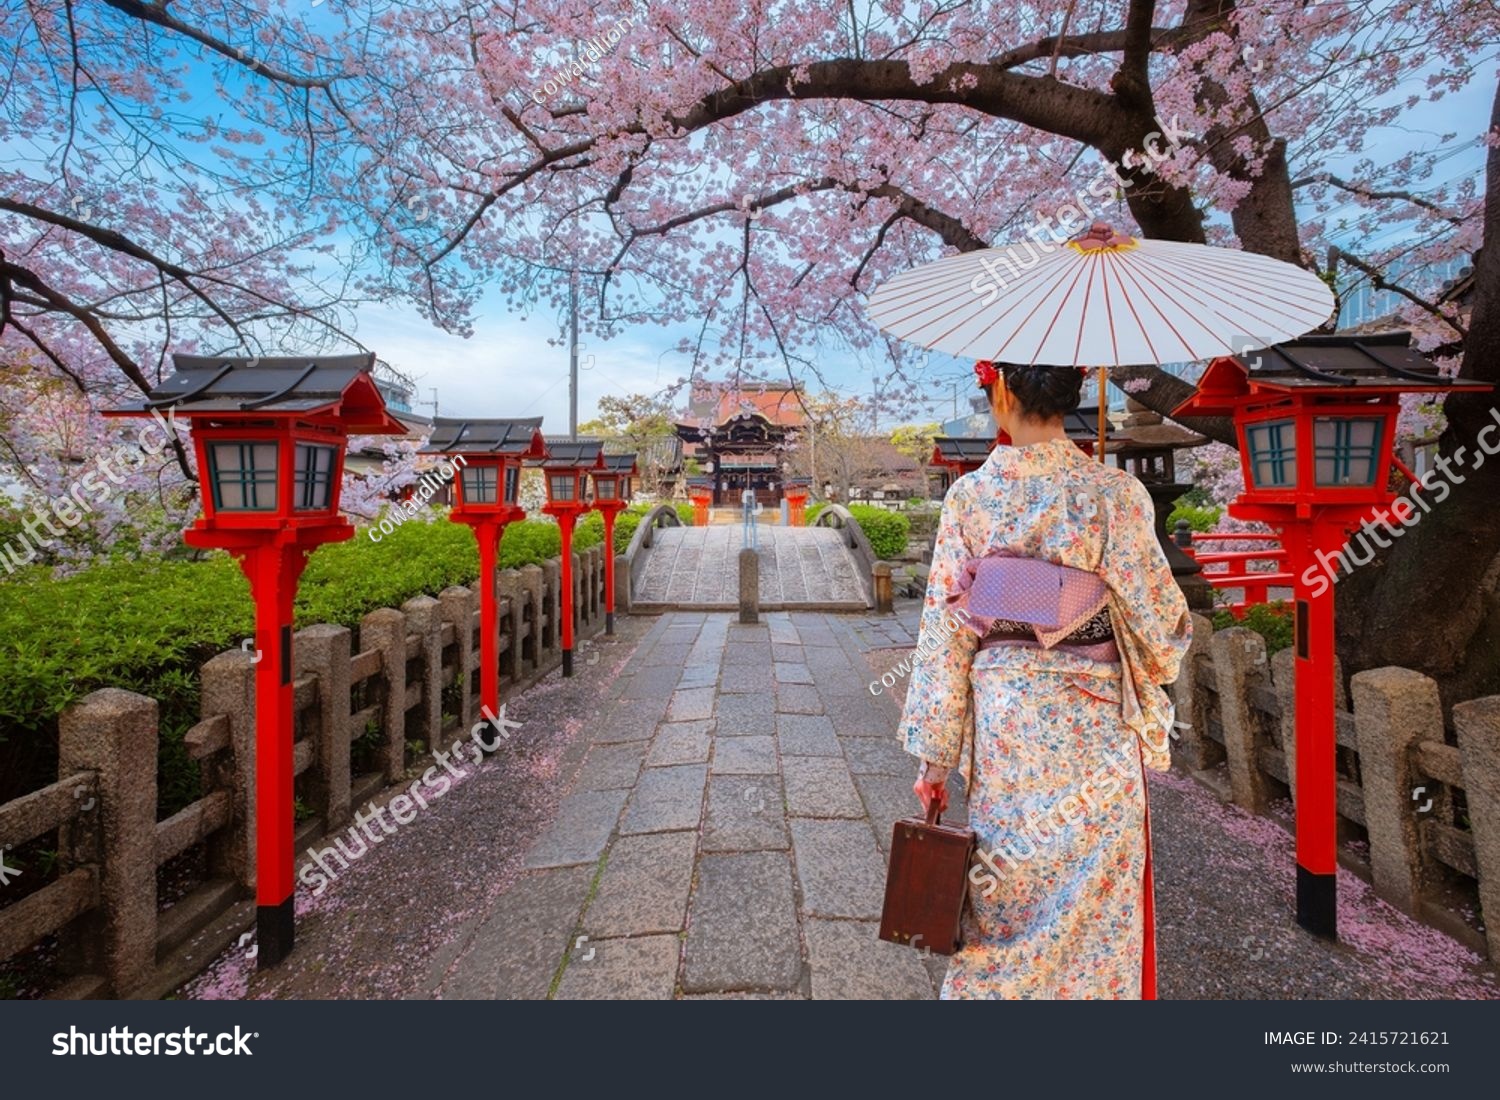 Young Japanese woman in a  traditional Kimono dress strolls by Rokusonno shrine during full bloom sakura cherry blossom period in Kyoto, Japan #2415721621